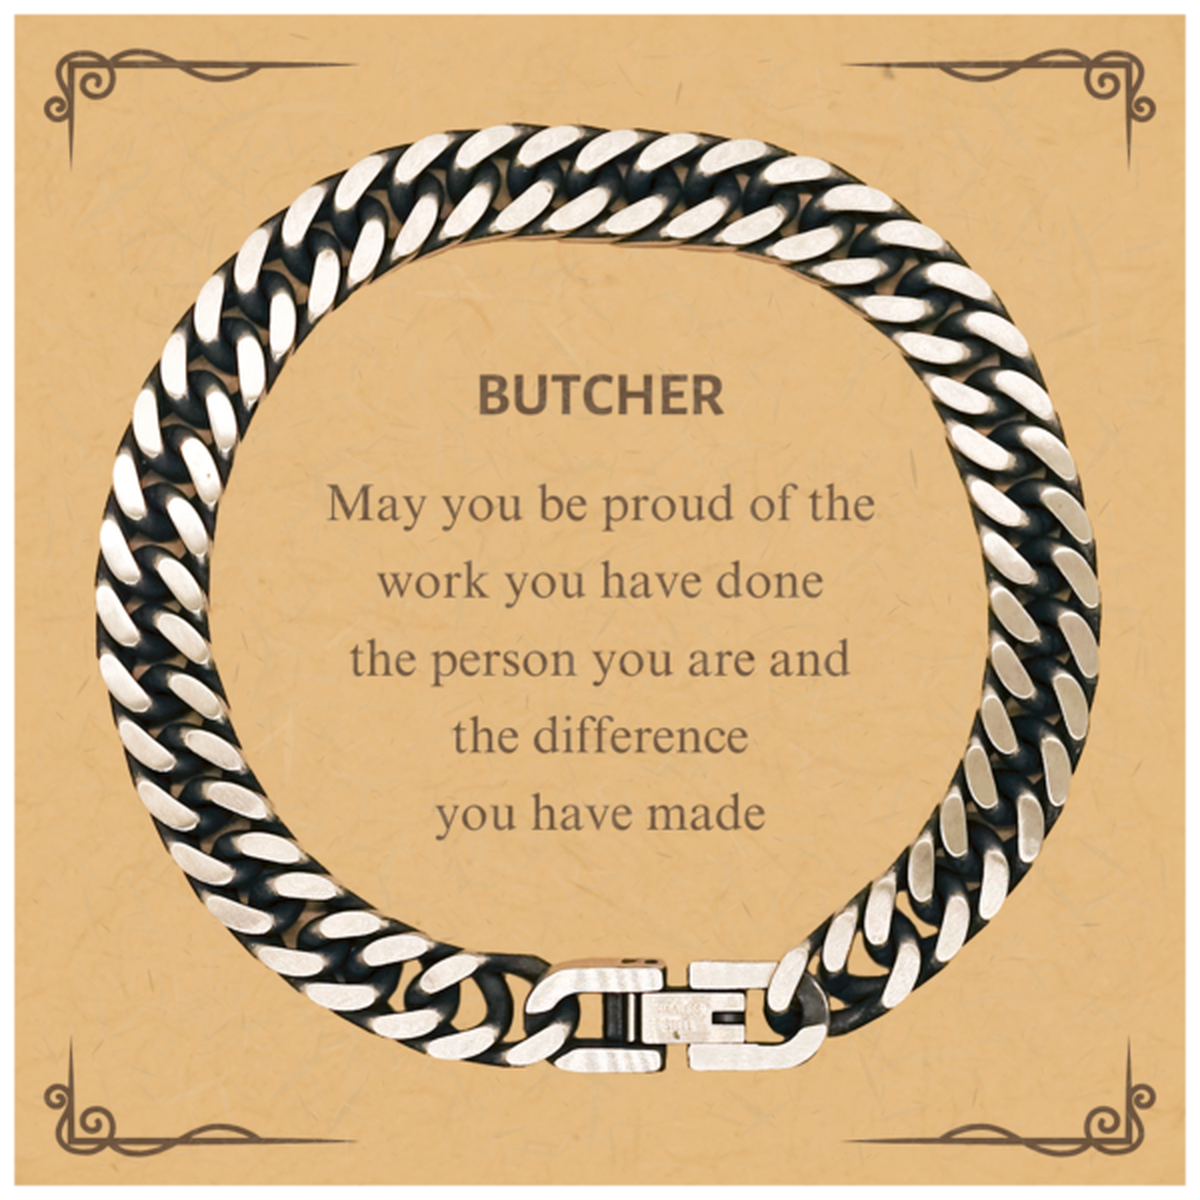 Butcher May you be proud of the work you have done, Retirement Butcher Cuban Link Chain Bracelet for Colleague Appreciation Gifts Amazing for Butcher